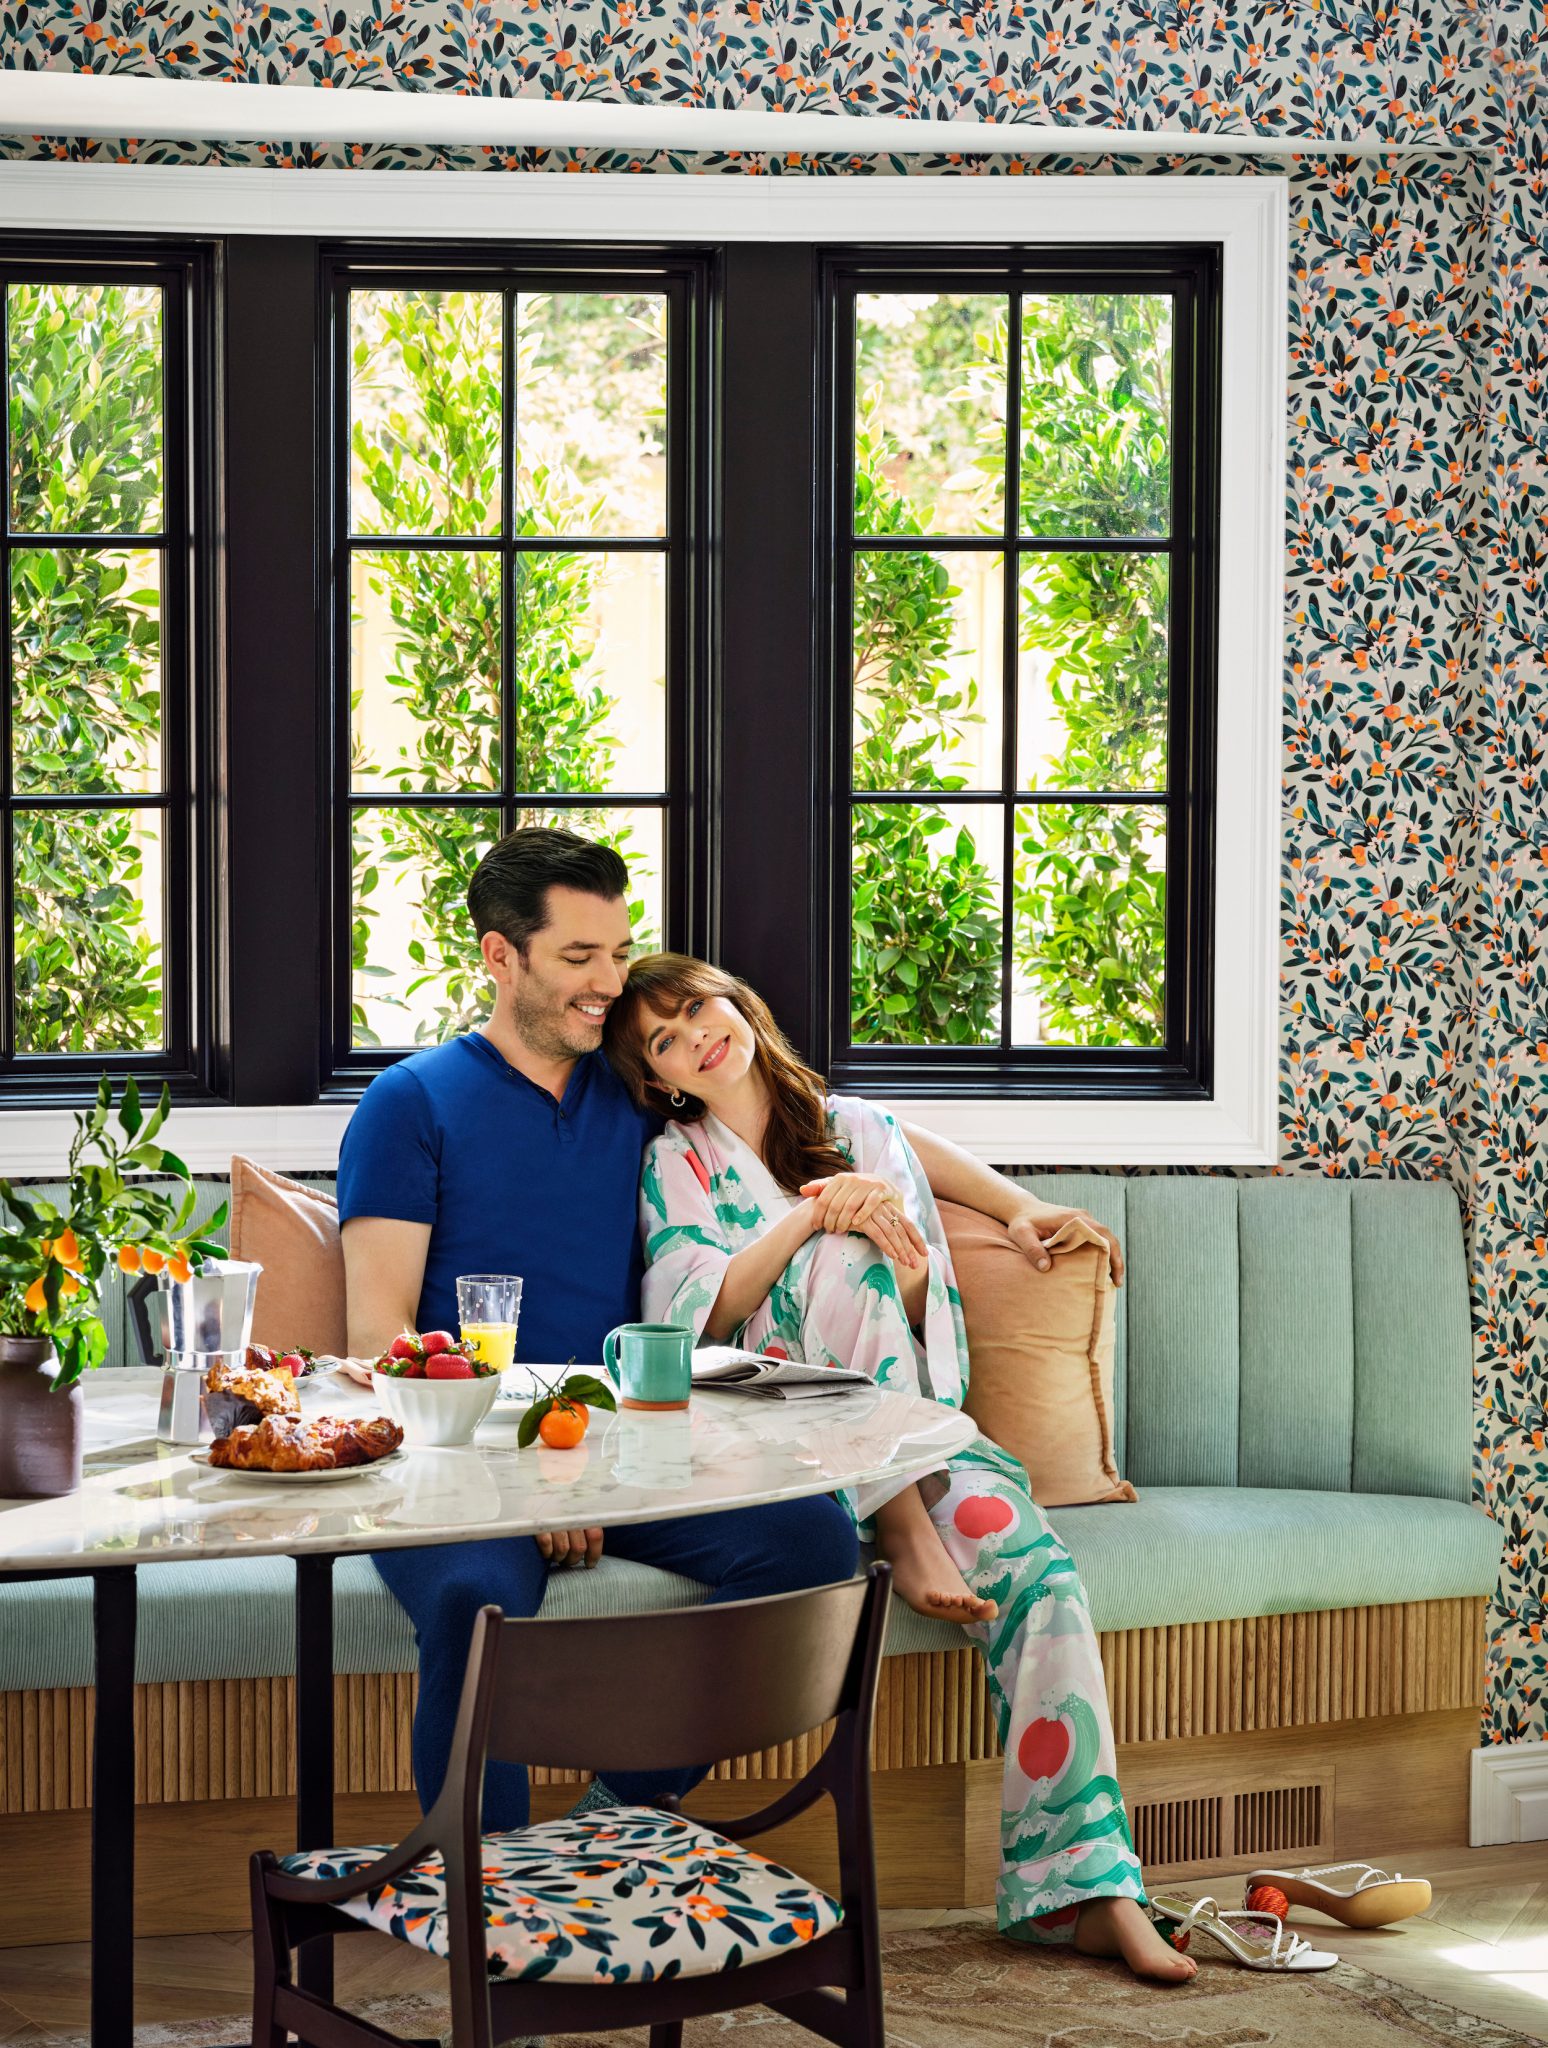 Zooey Deschanel and Jonathan Scott in Reveal Magazine for their home and craft room makeover